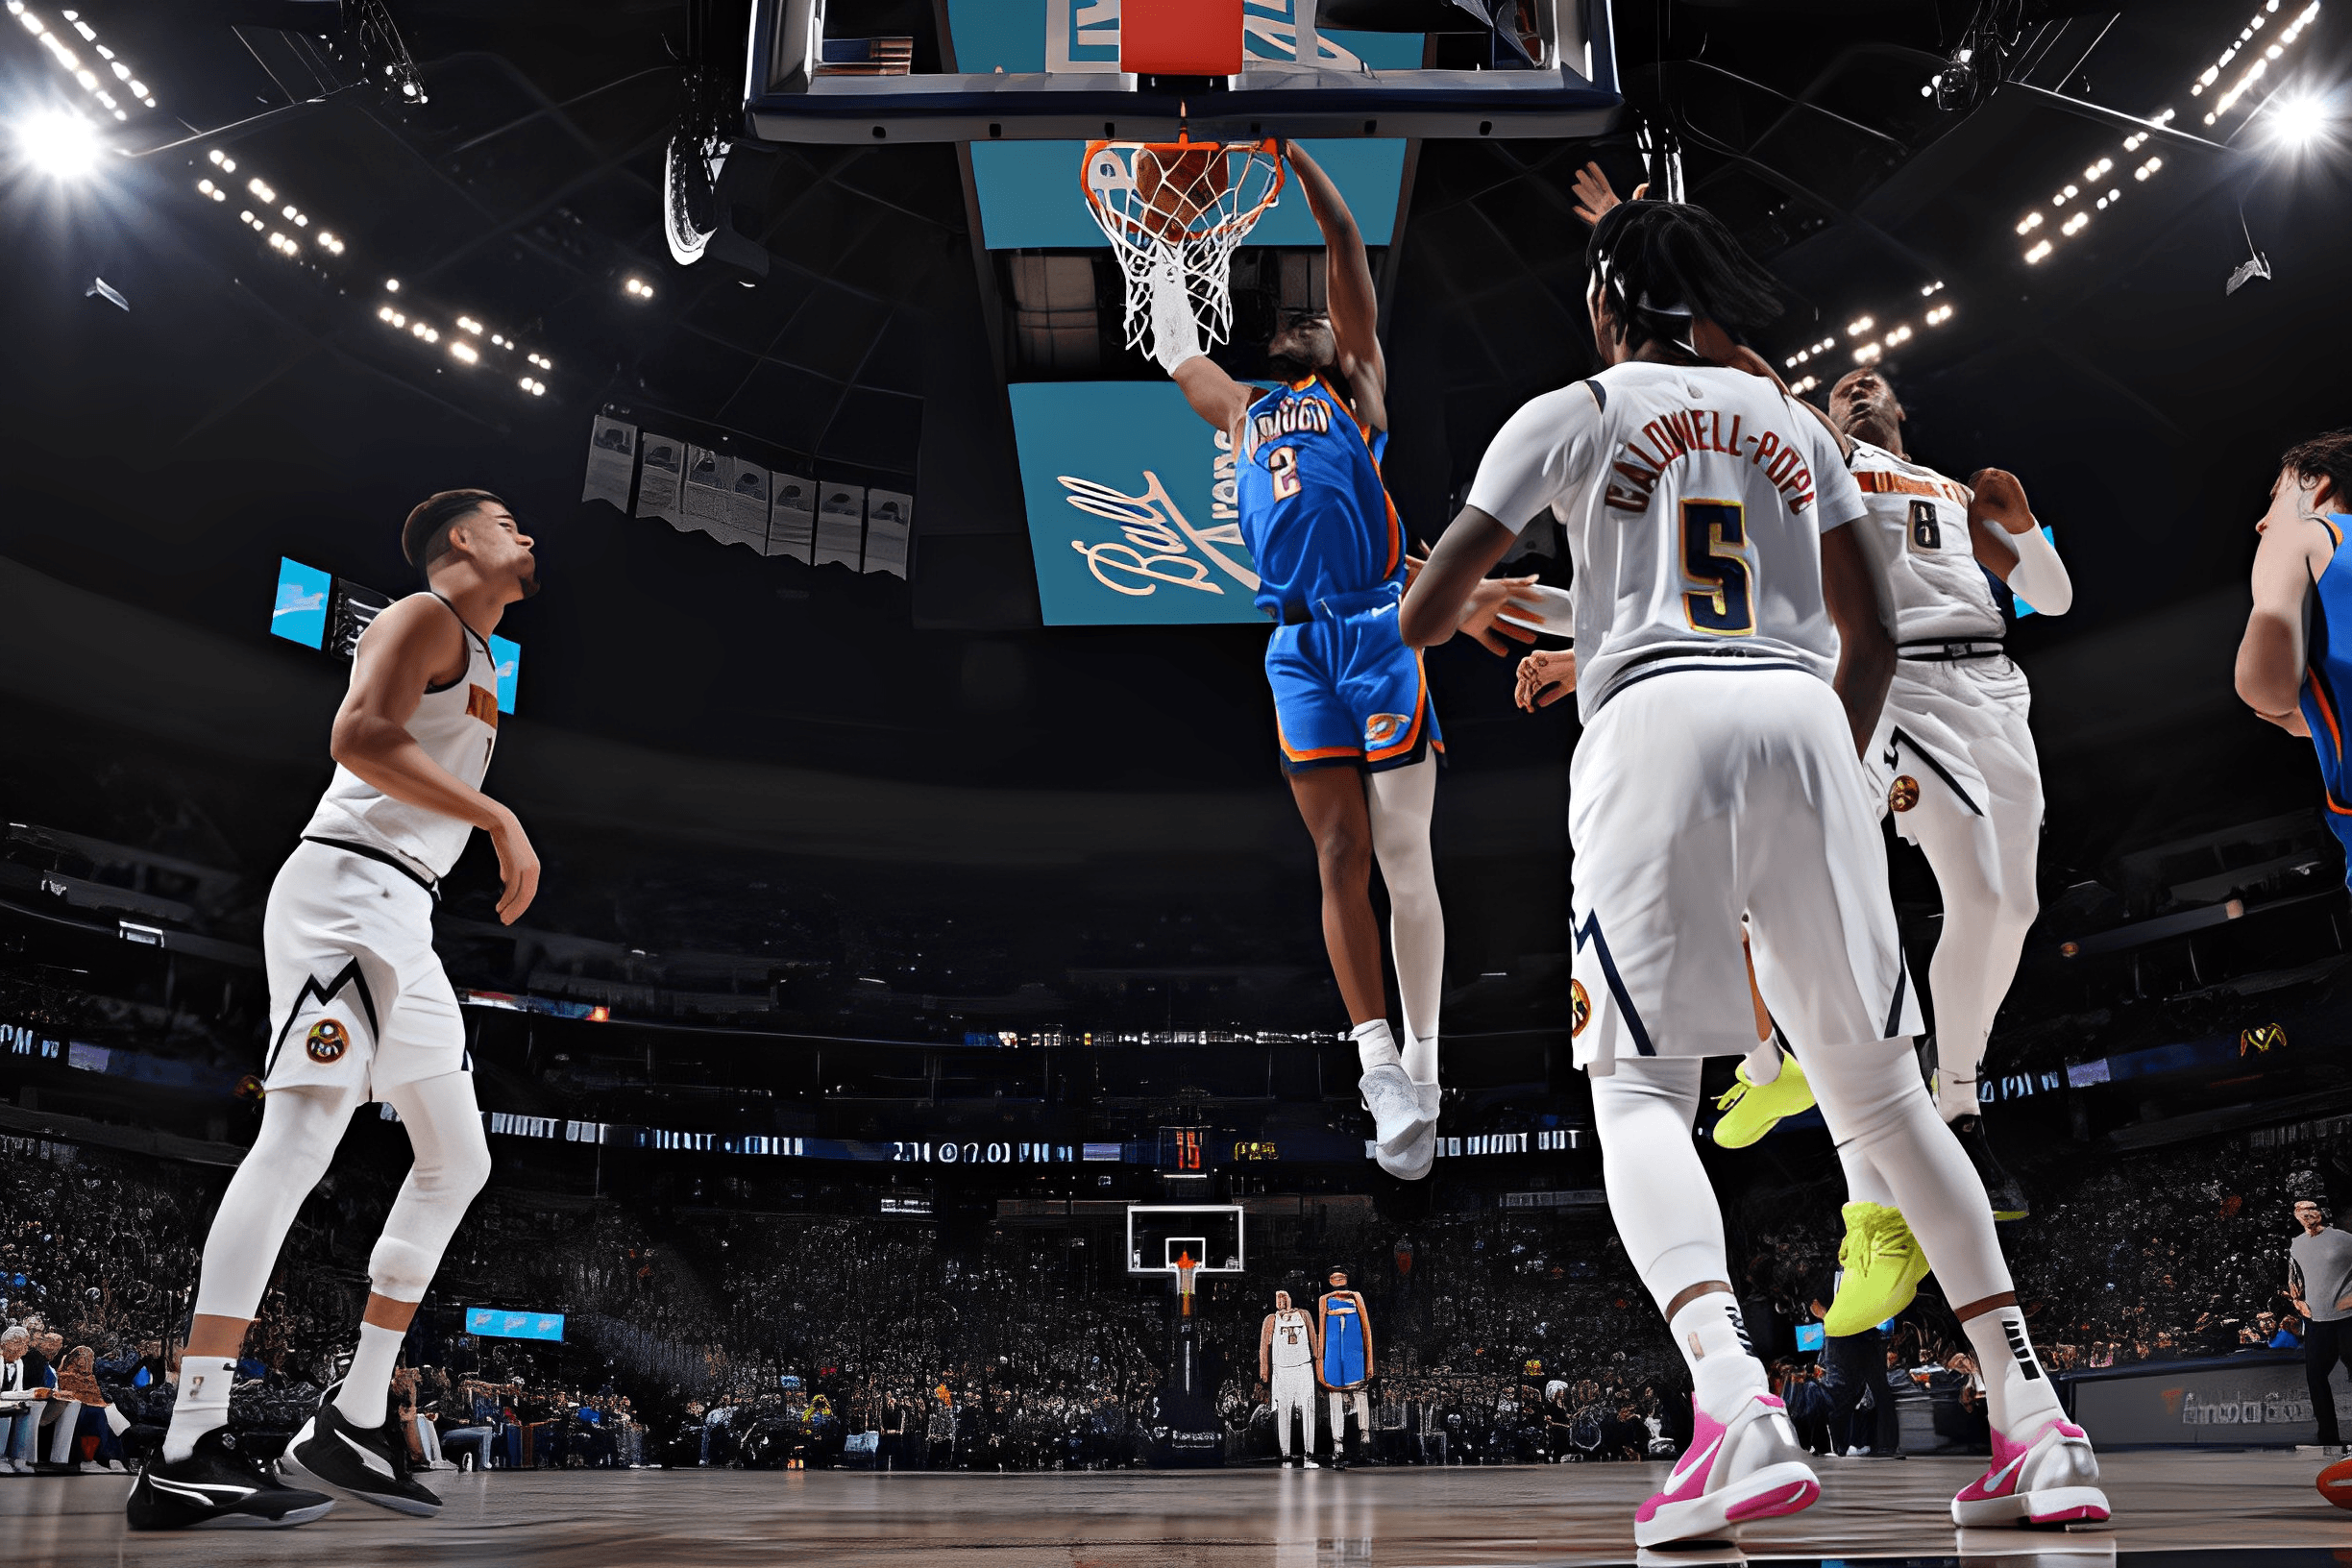 Shai Gilgeous-Alexander drives to the basket during the Thunder vs. Nuggets game at Ball Arena in Denver, Colorado.